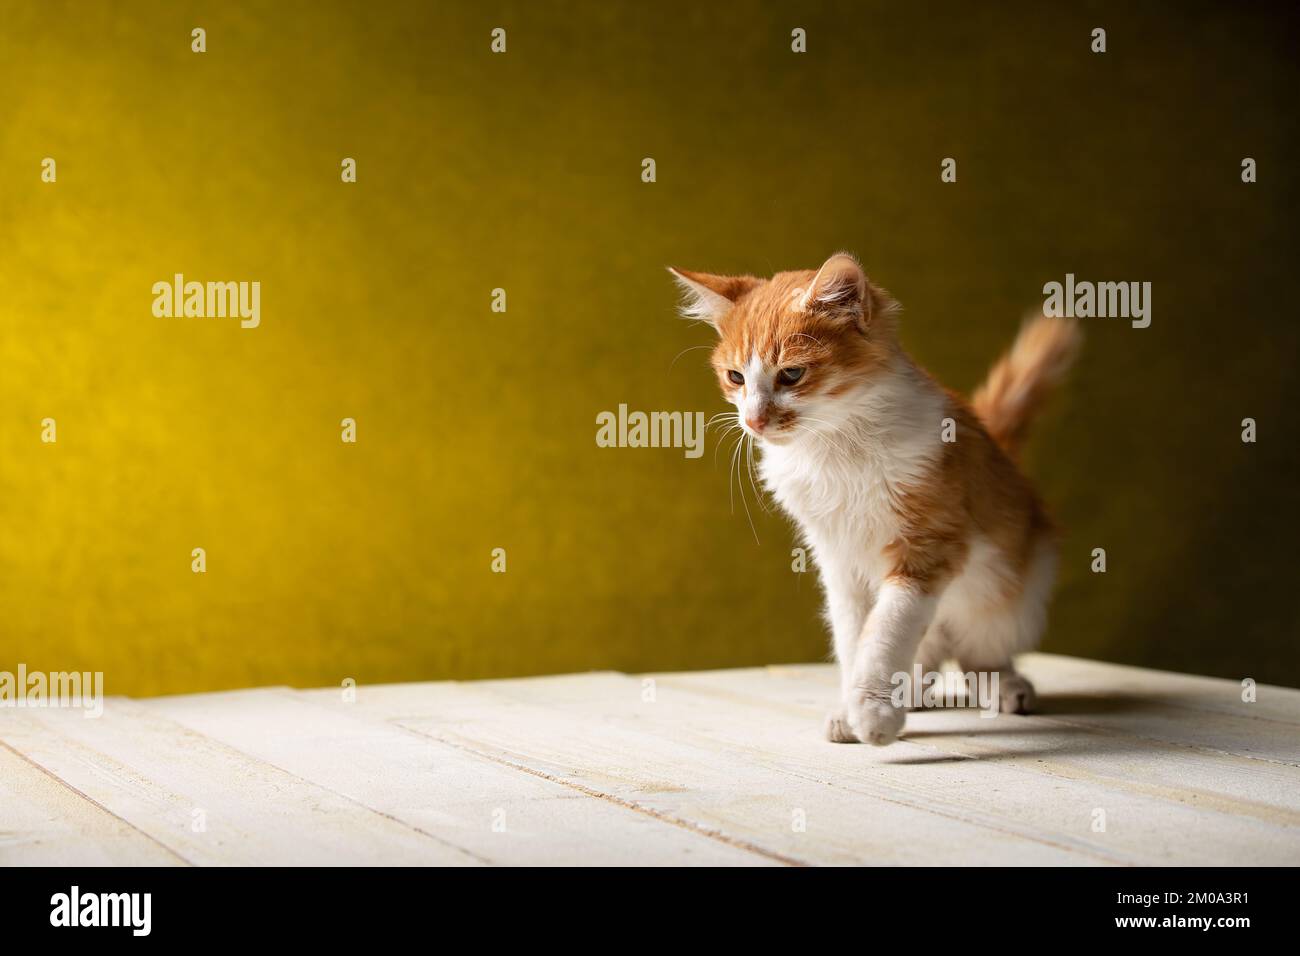 cute red kitten is standing on the white wooden table Stock Photo